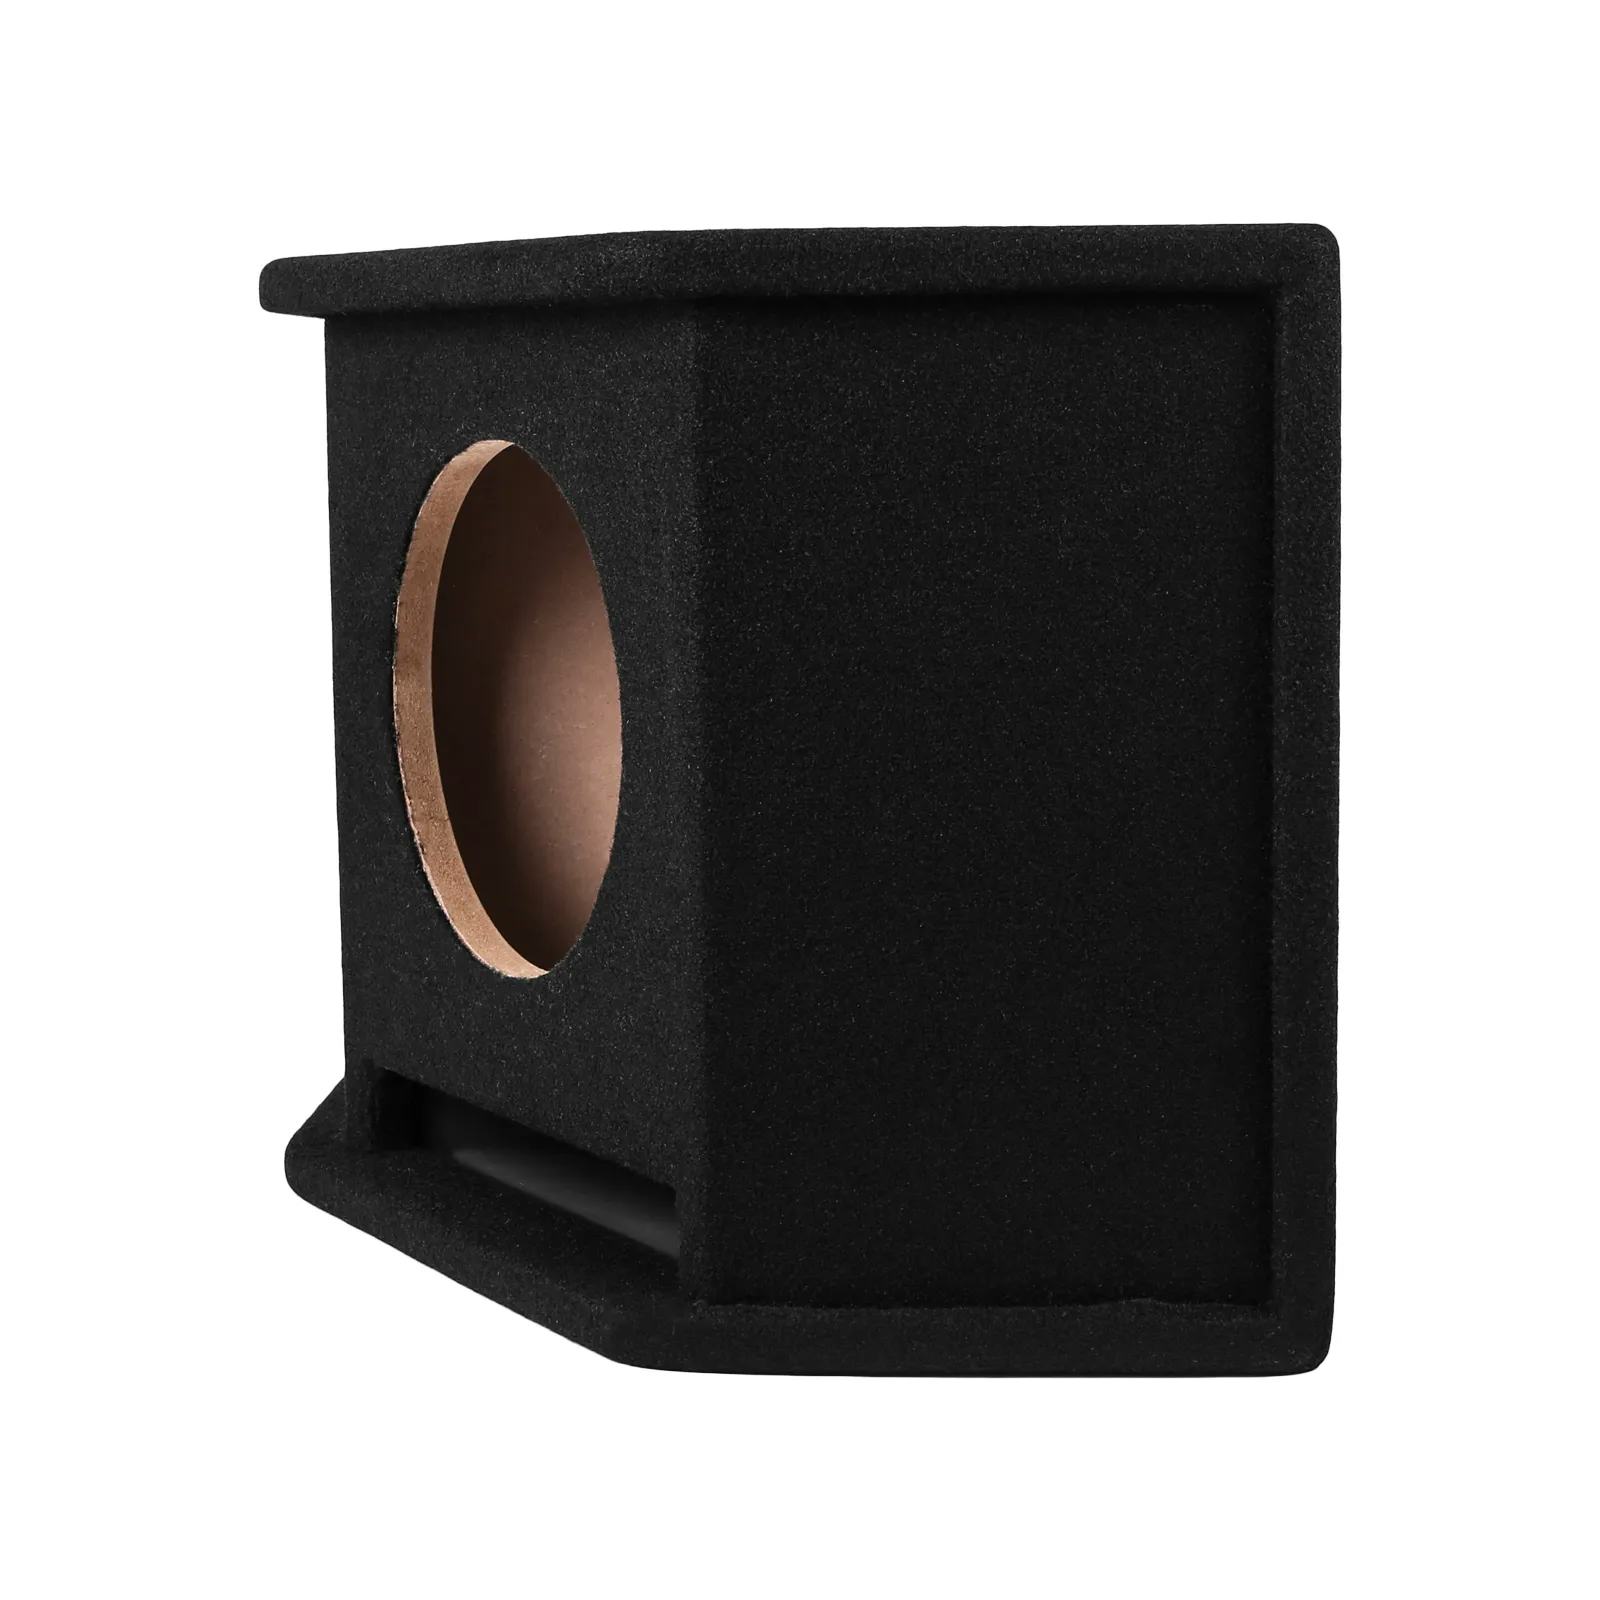 Triple 8" Ported Universal Fit Subwoofer Box #5